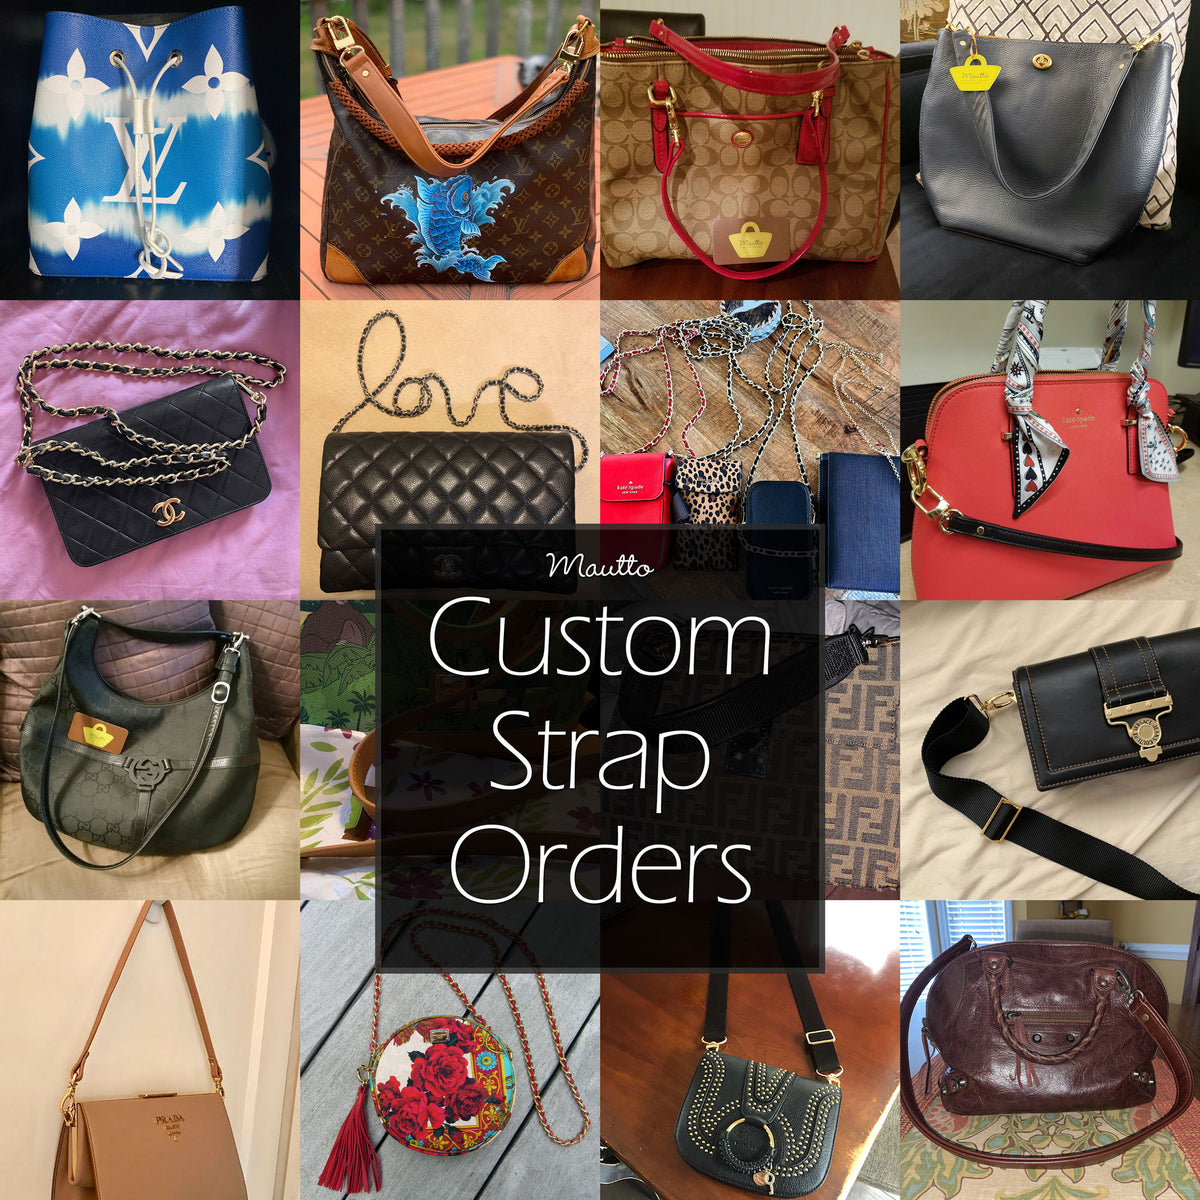 Accessories, New Custom Replacement Purse Crossbody Strap Made With  Authentic Lv Canvas